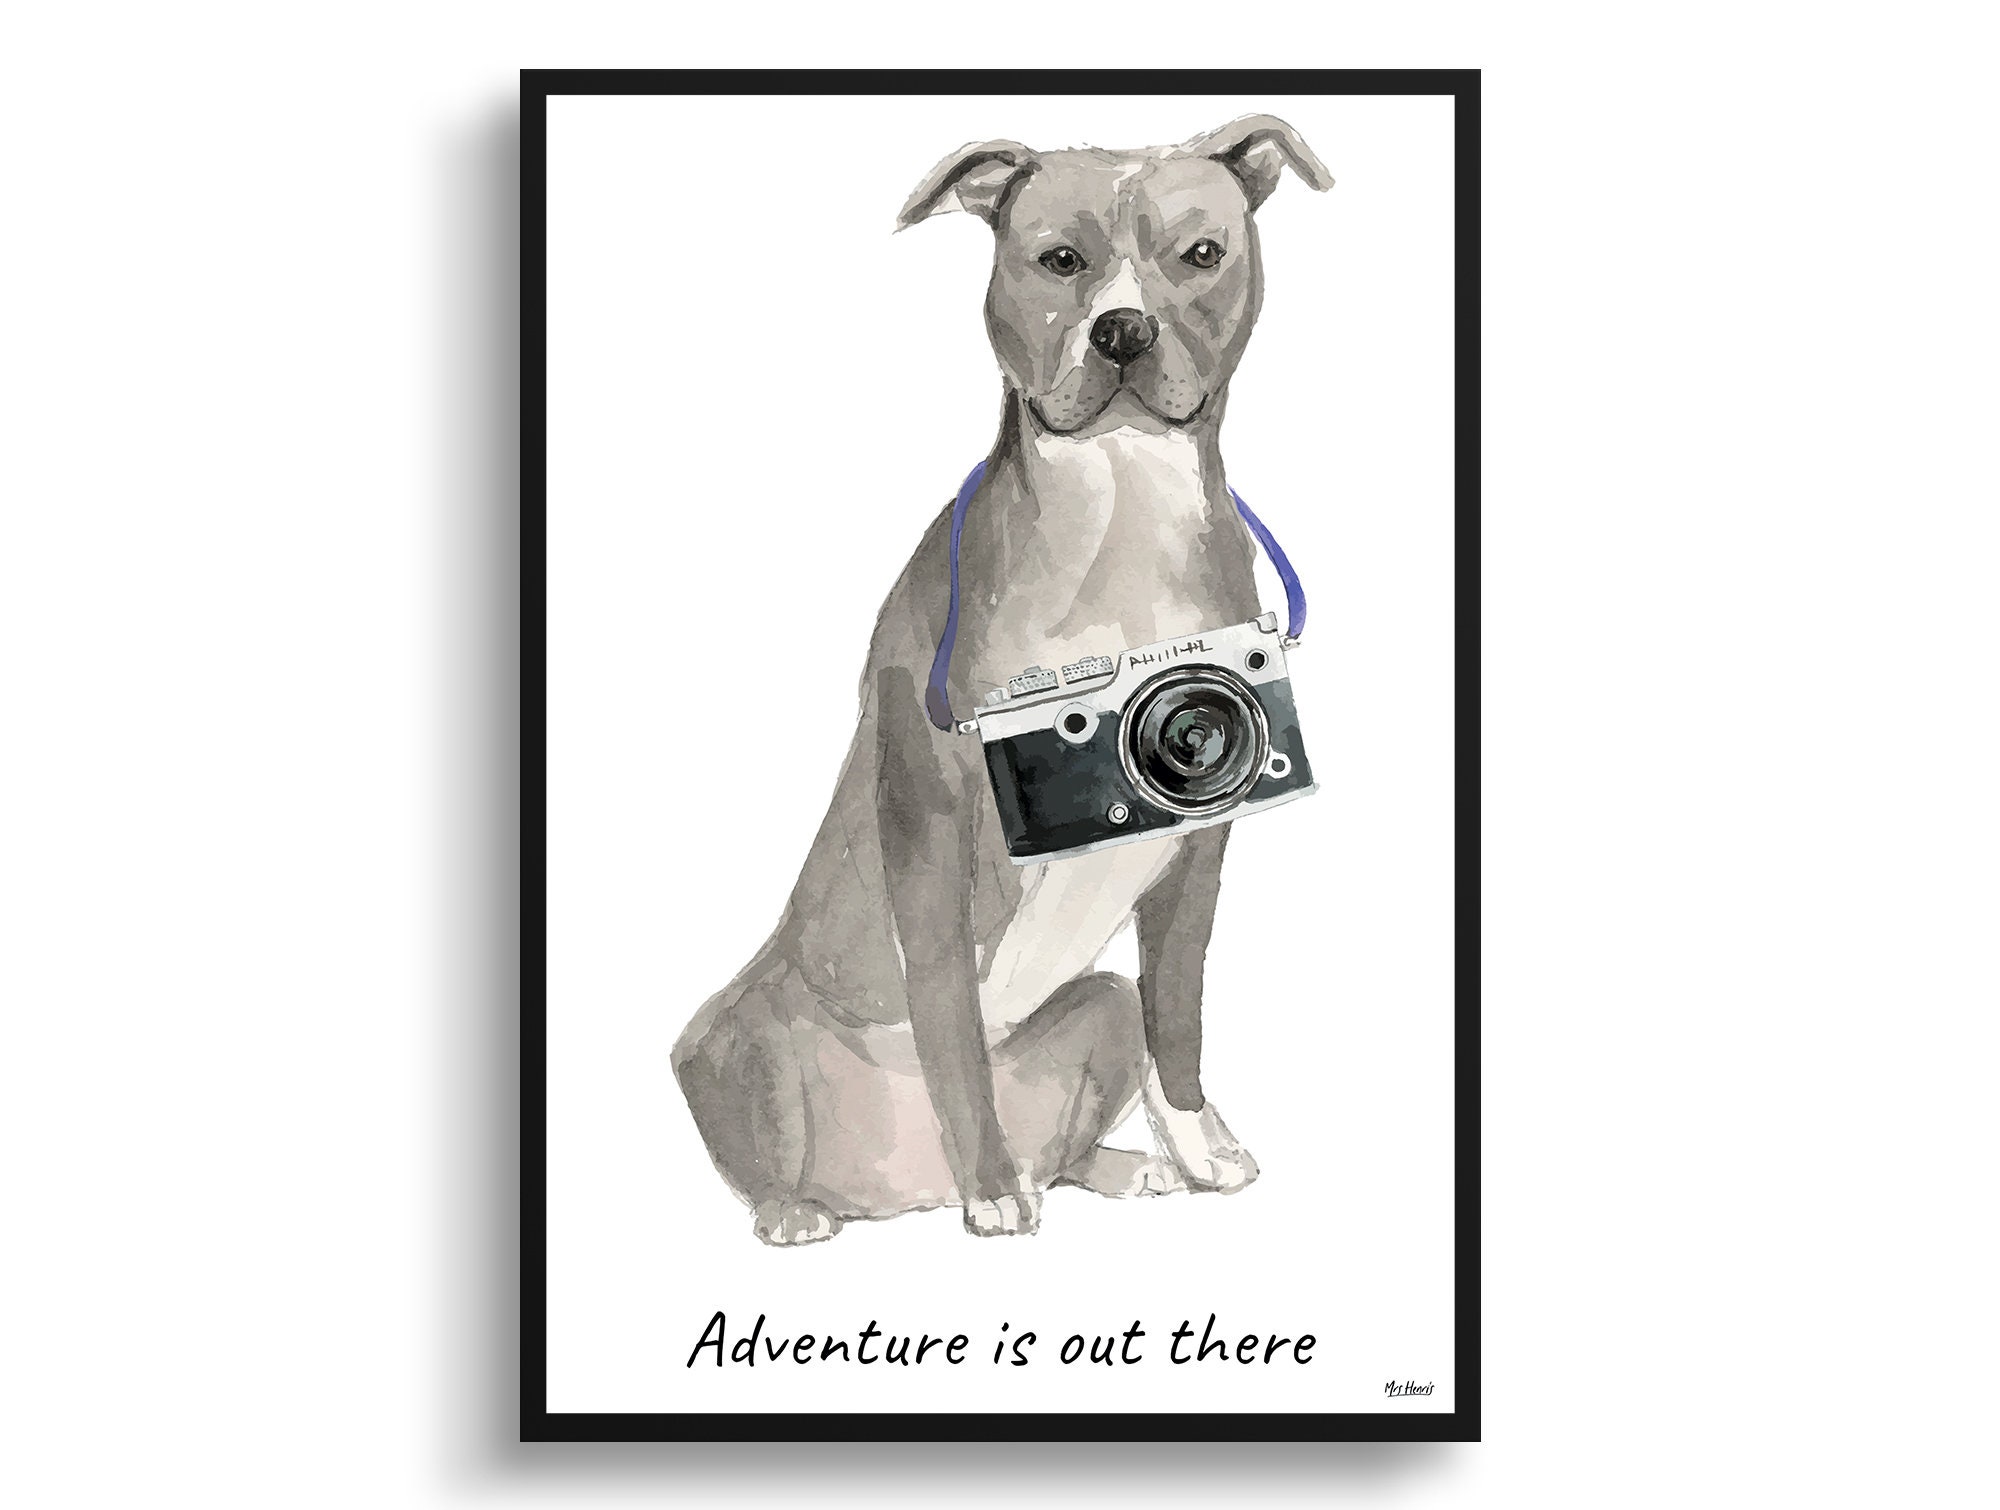 Adventure Is Out There Grey American Staffordshire Terrier Dog Print Illustration. Framed & Un-Framed Wall Art Options. Personalised Name